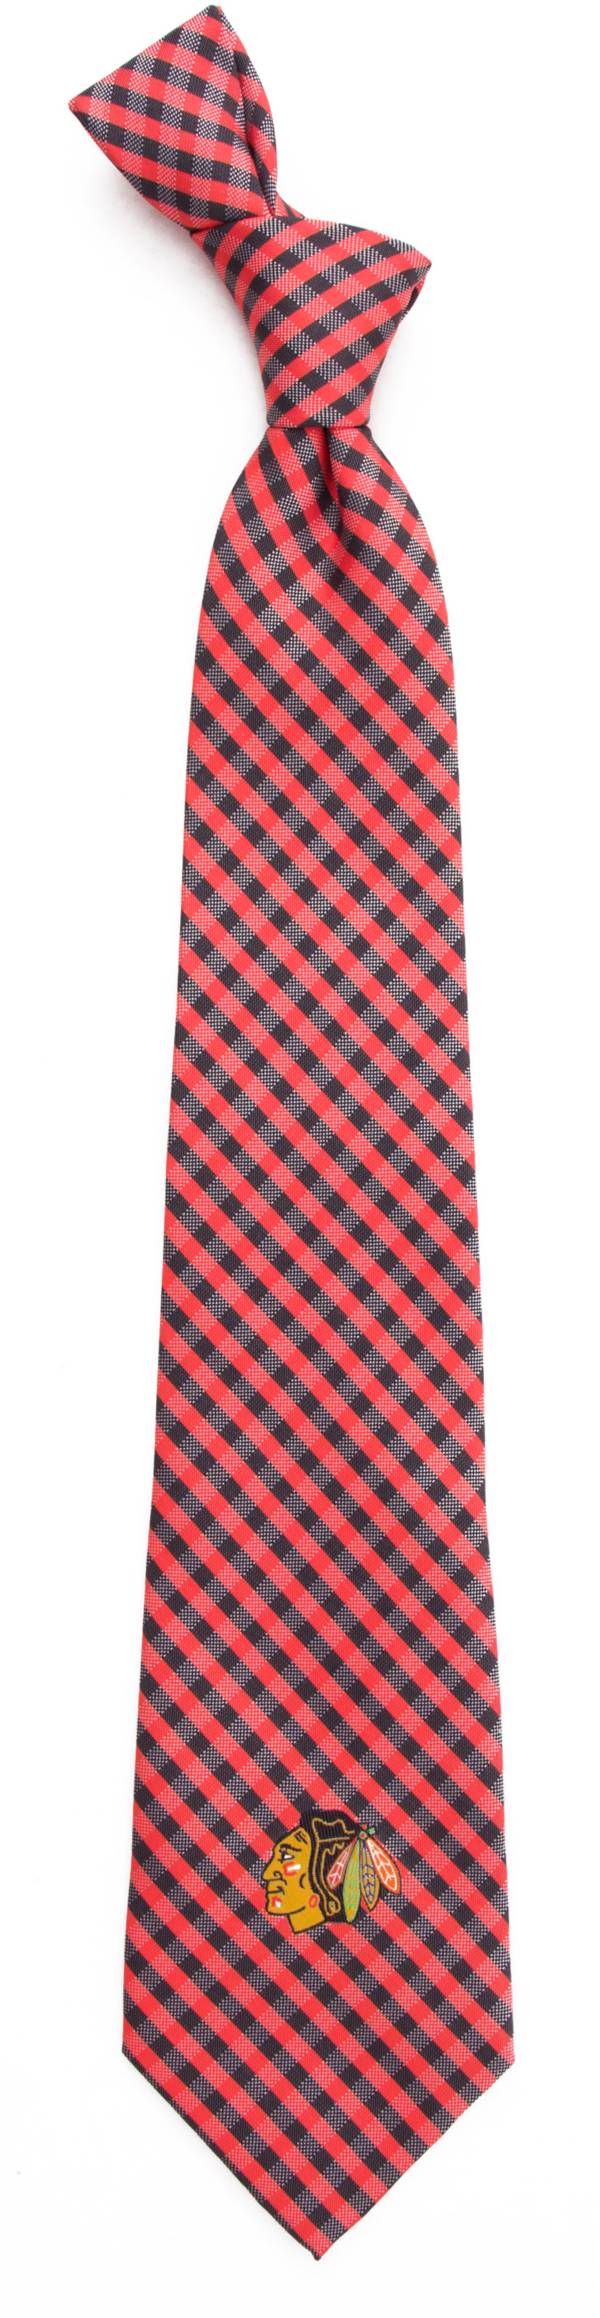 Eagles Wings Chicago Blackhawks Gingham Necktie product image